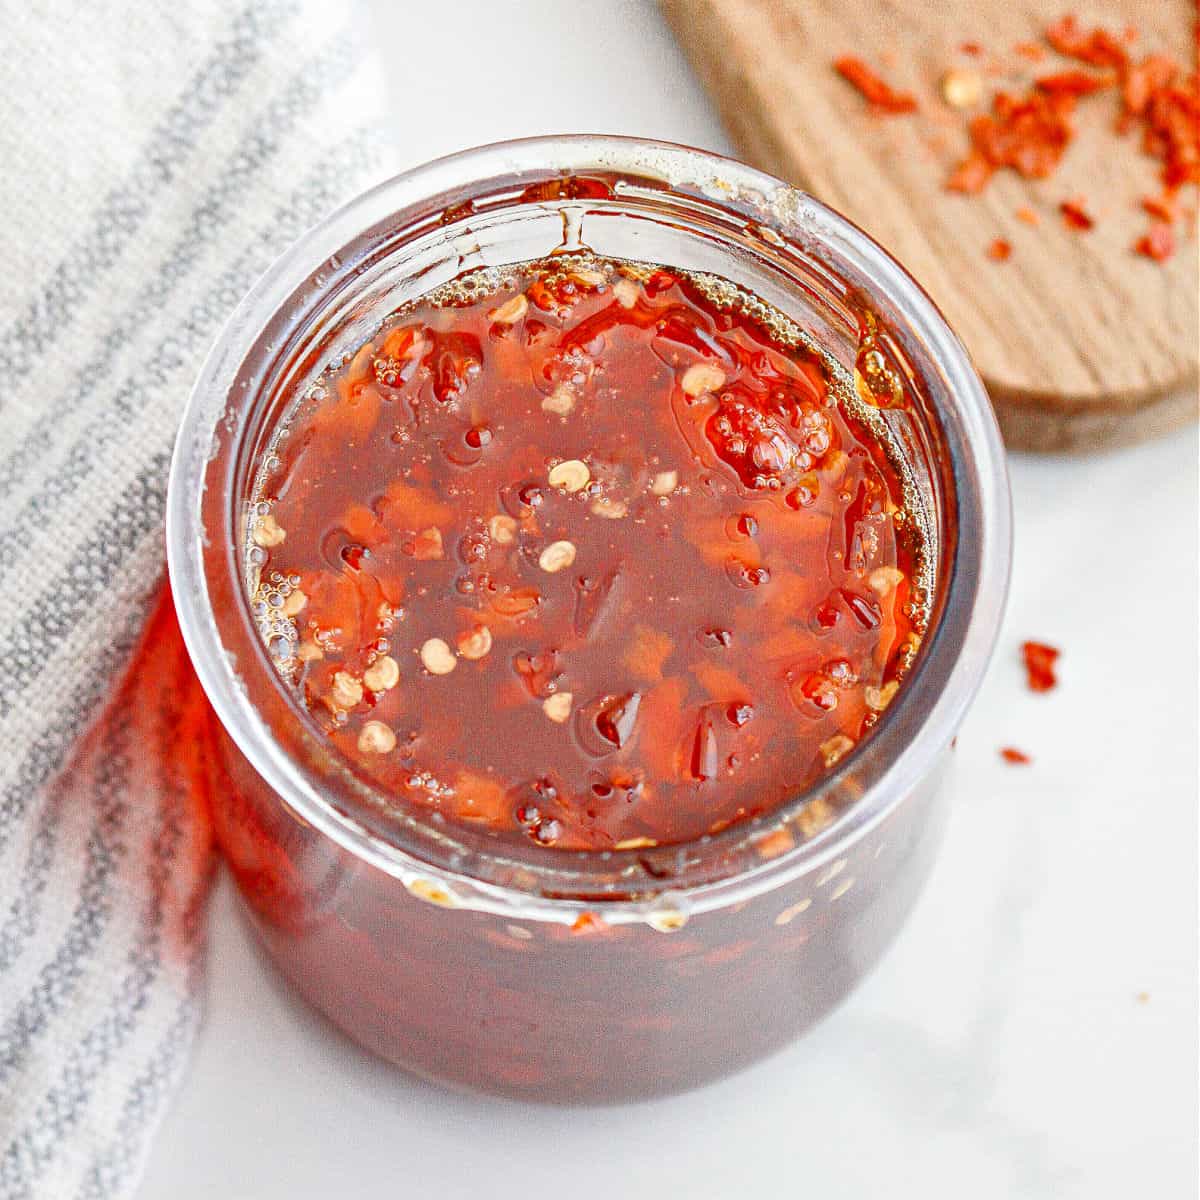 Top view of jar with red chili jam. White surface, striped cloth. 